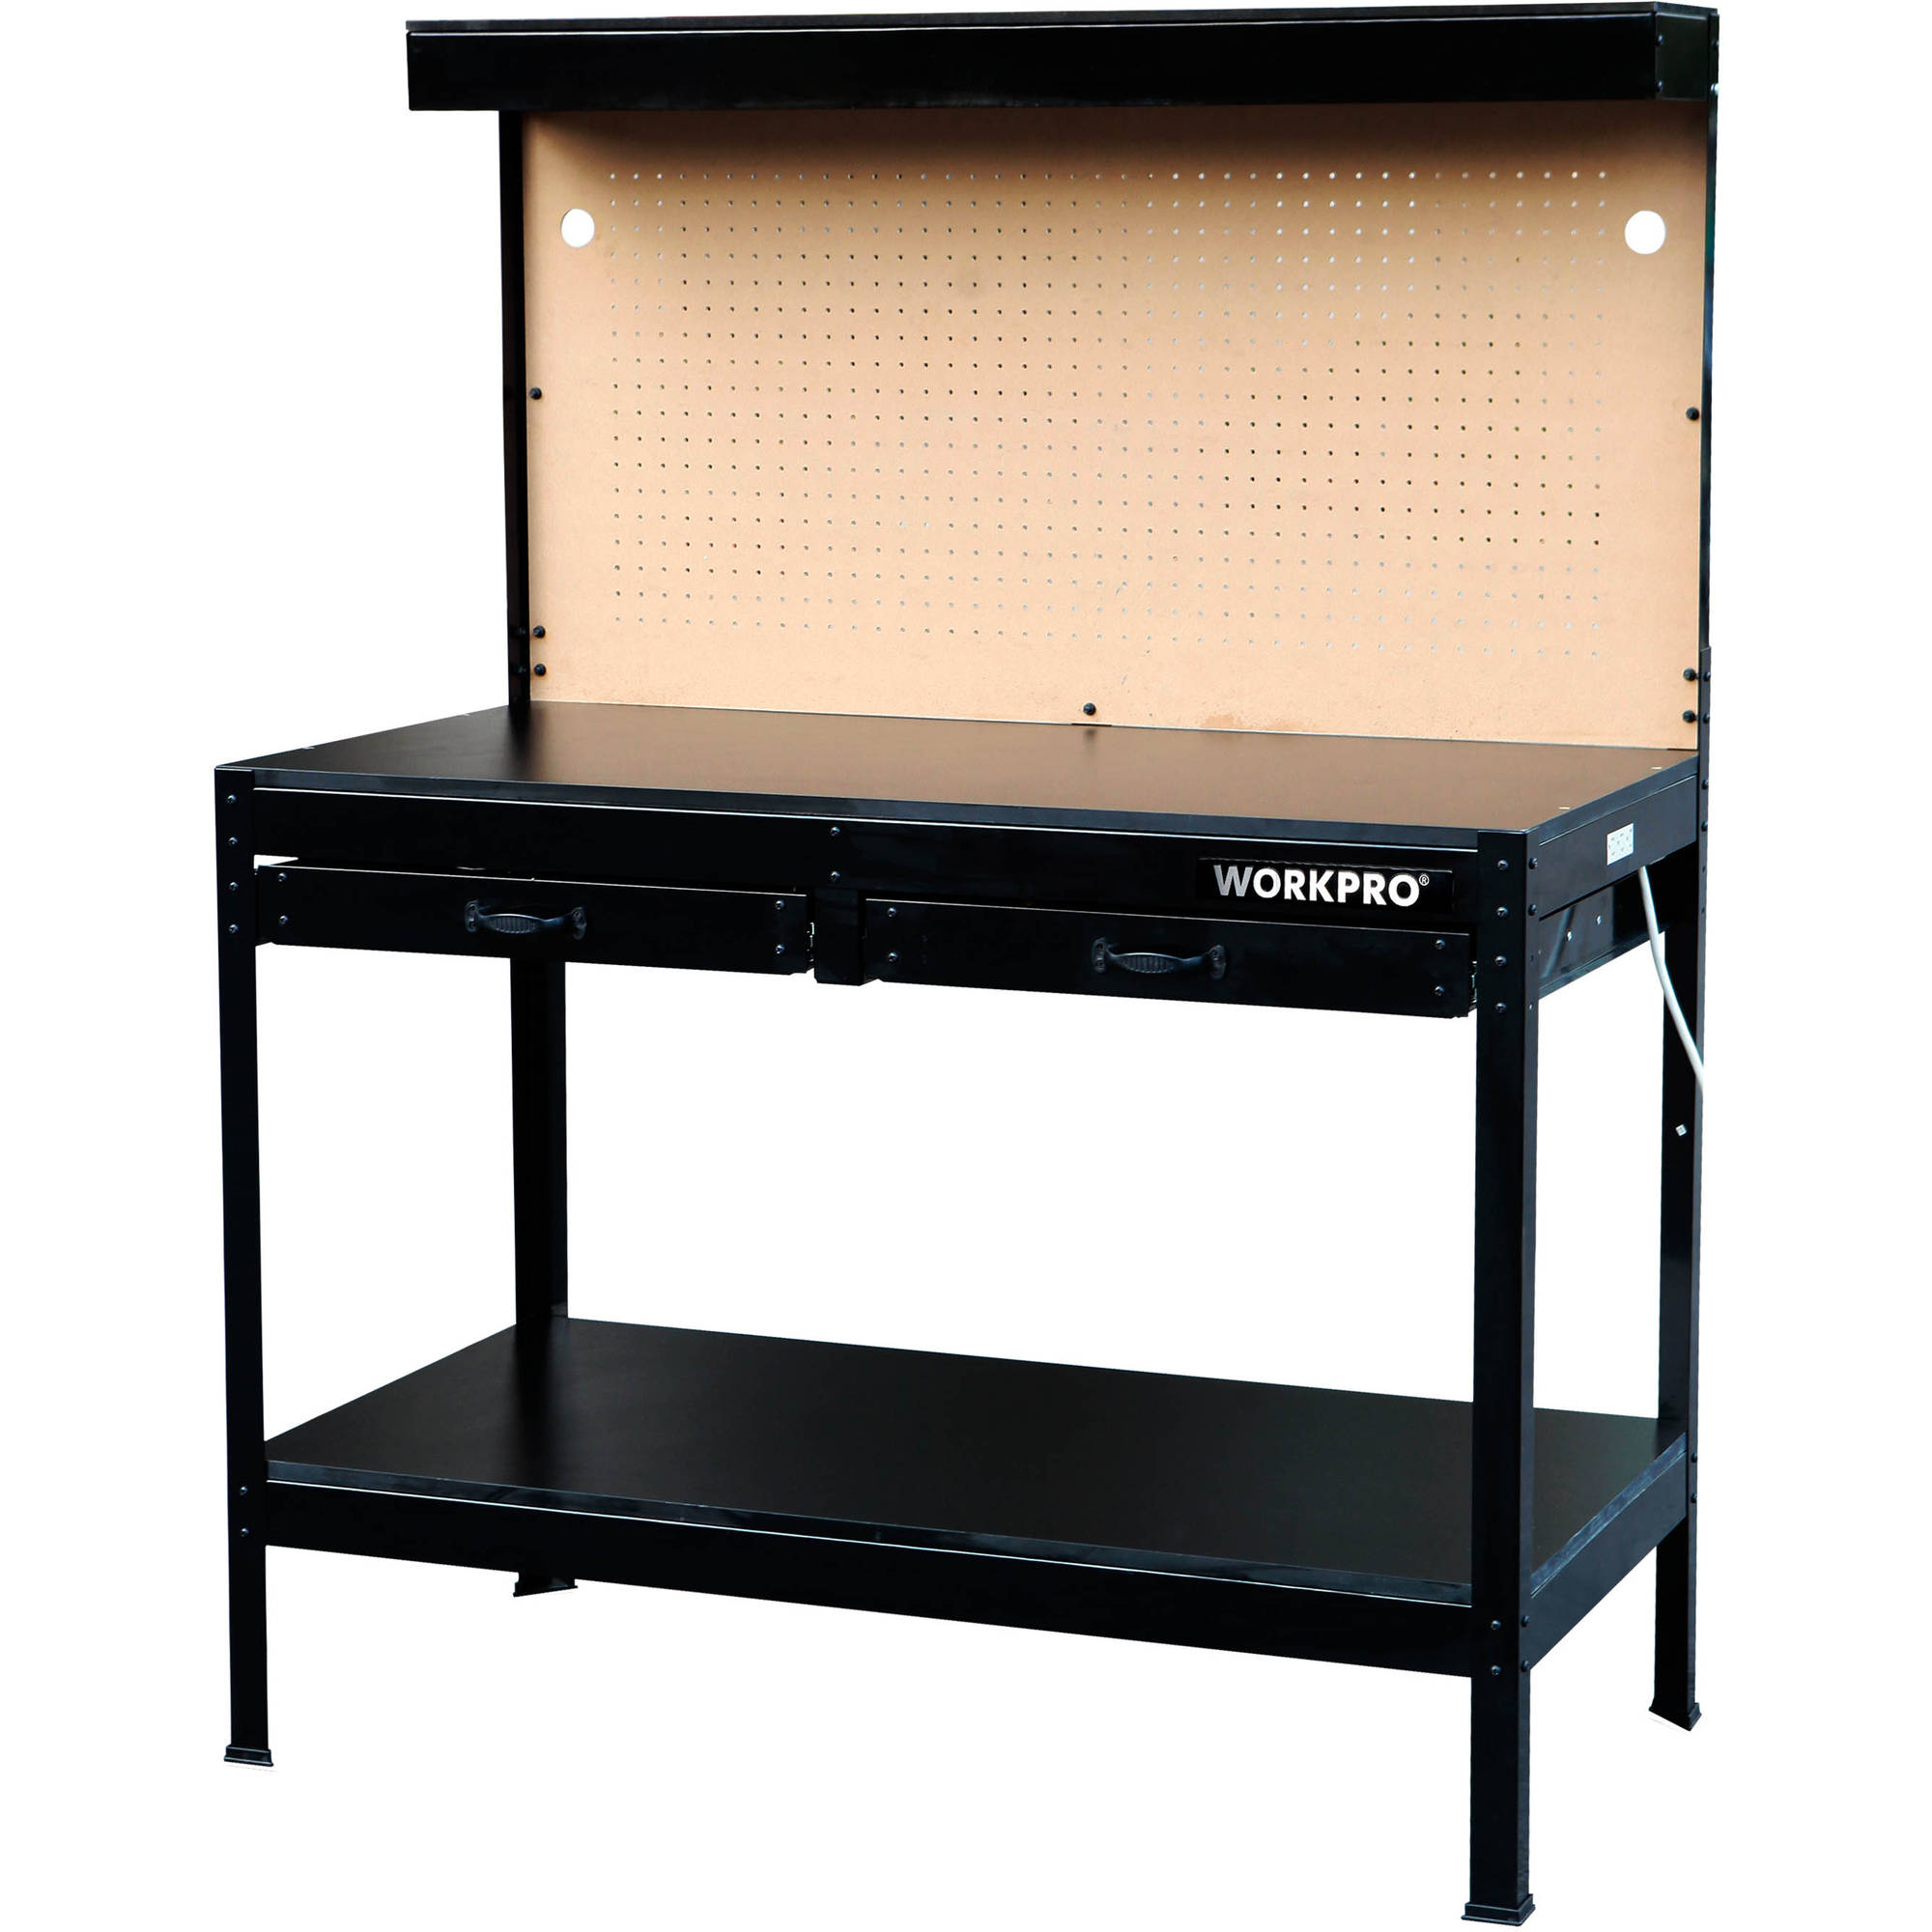 WORKPRO Multi-Purpose 48-Inch Workbench with Work Light, 3302 - image 1 of 10